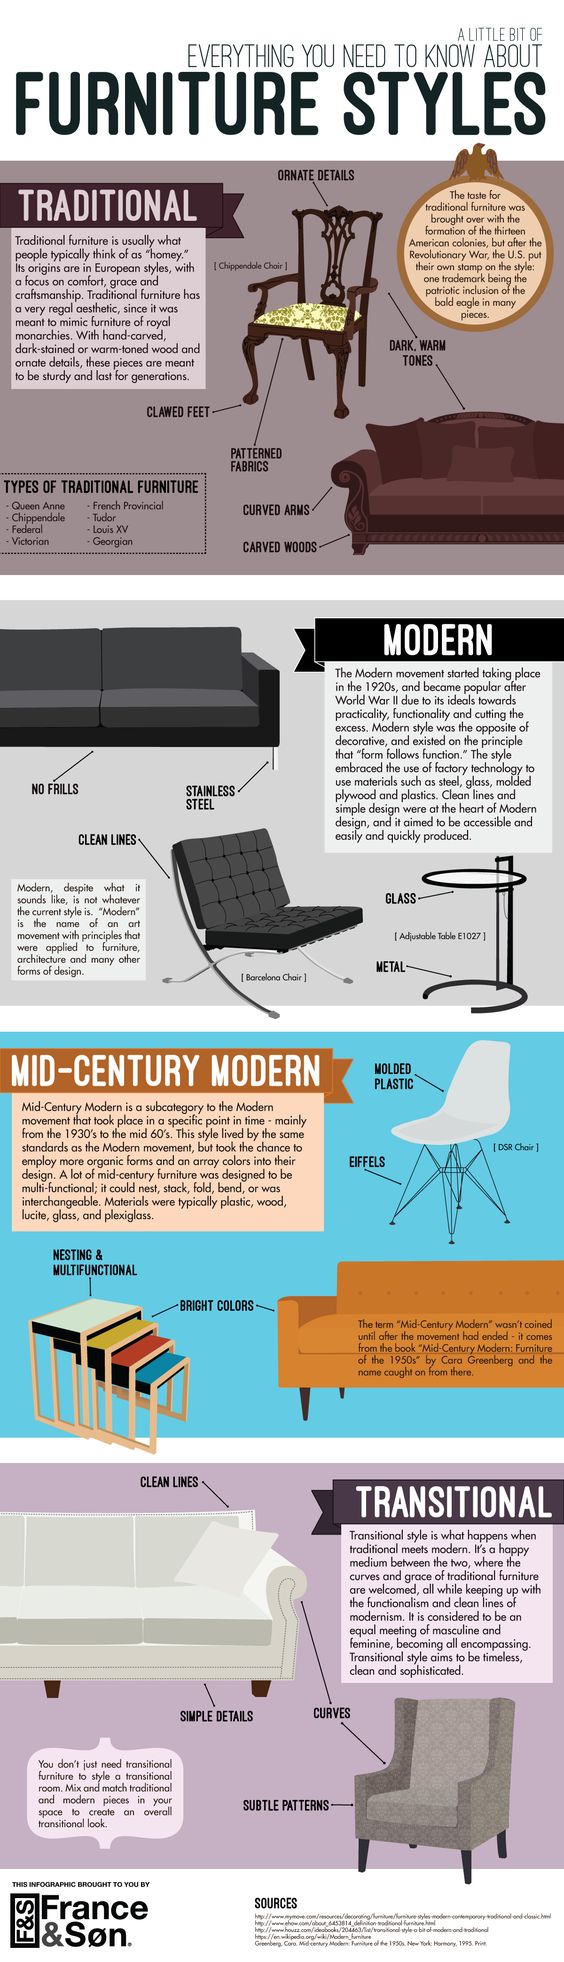 Infographic - (A little bit of) Everything You Need to Know About Furniture Styles - learn about how to differentiate between traditional, modern, mid-century modern and transitional furniture pieces.